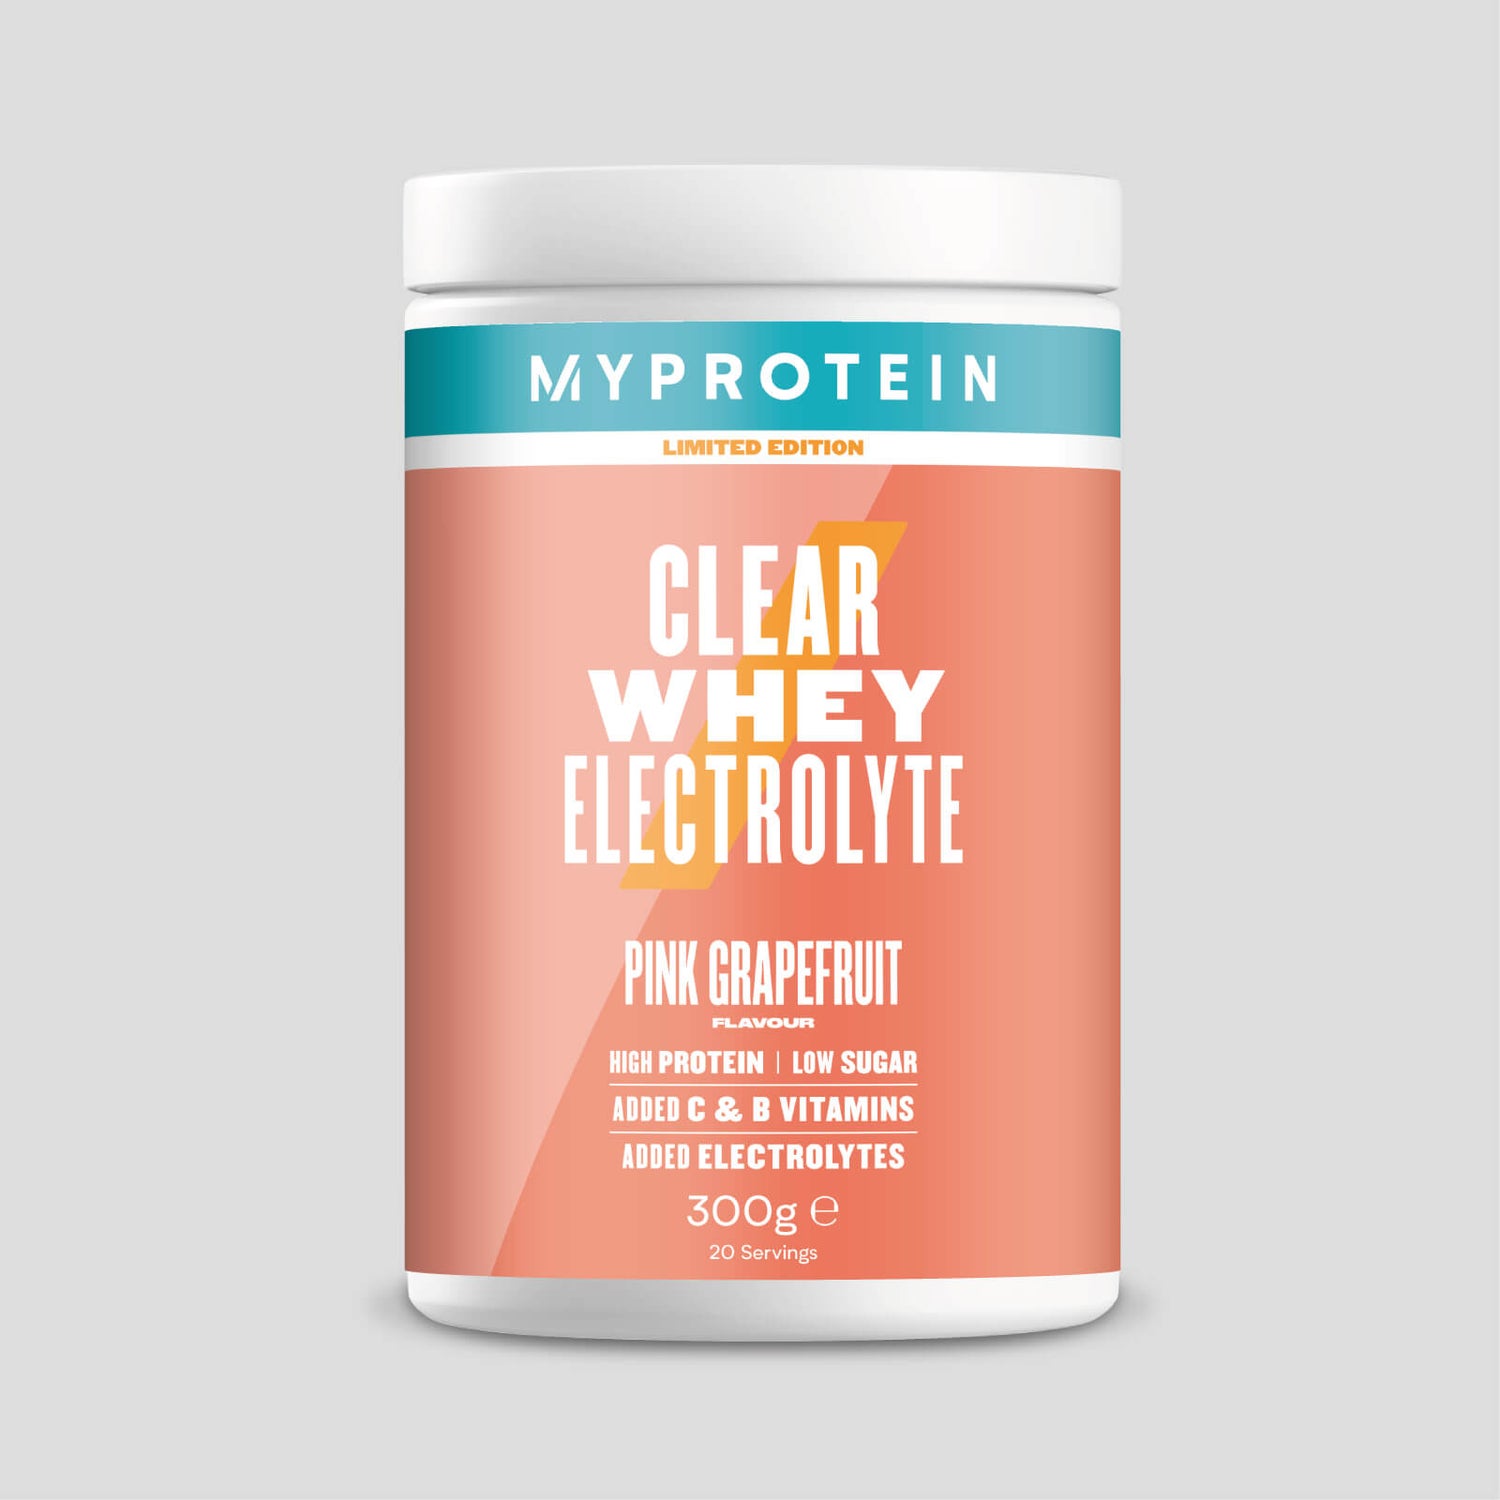 Clear Whey Electrolyte - 20servings - Pink Grapefruit